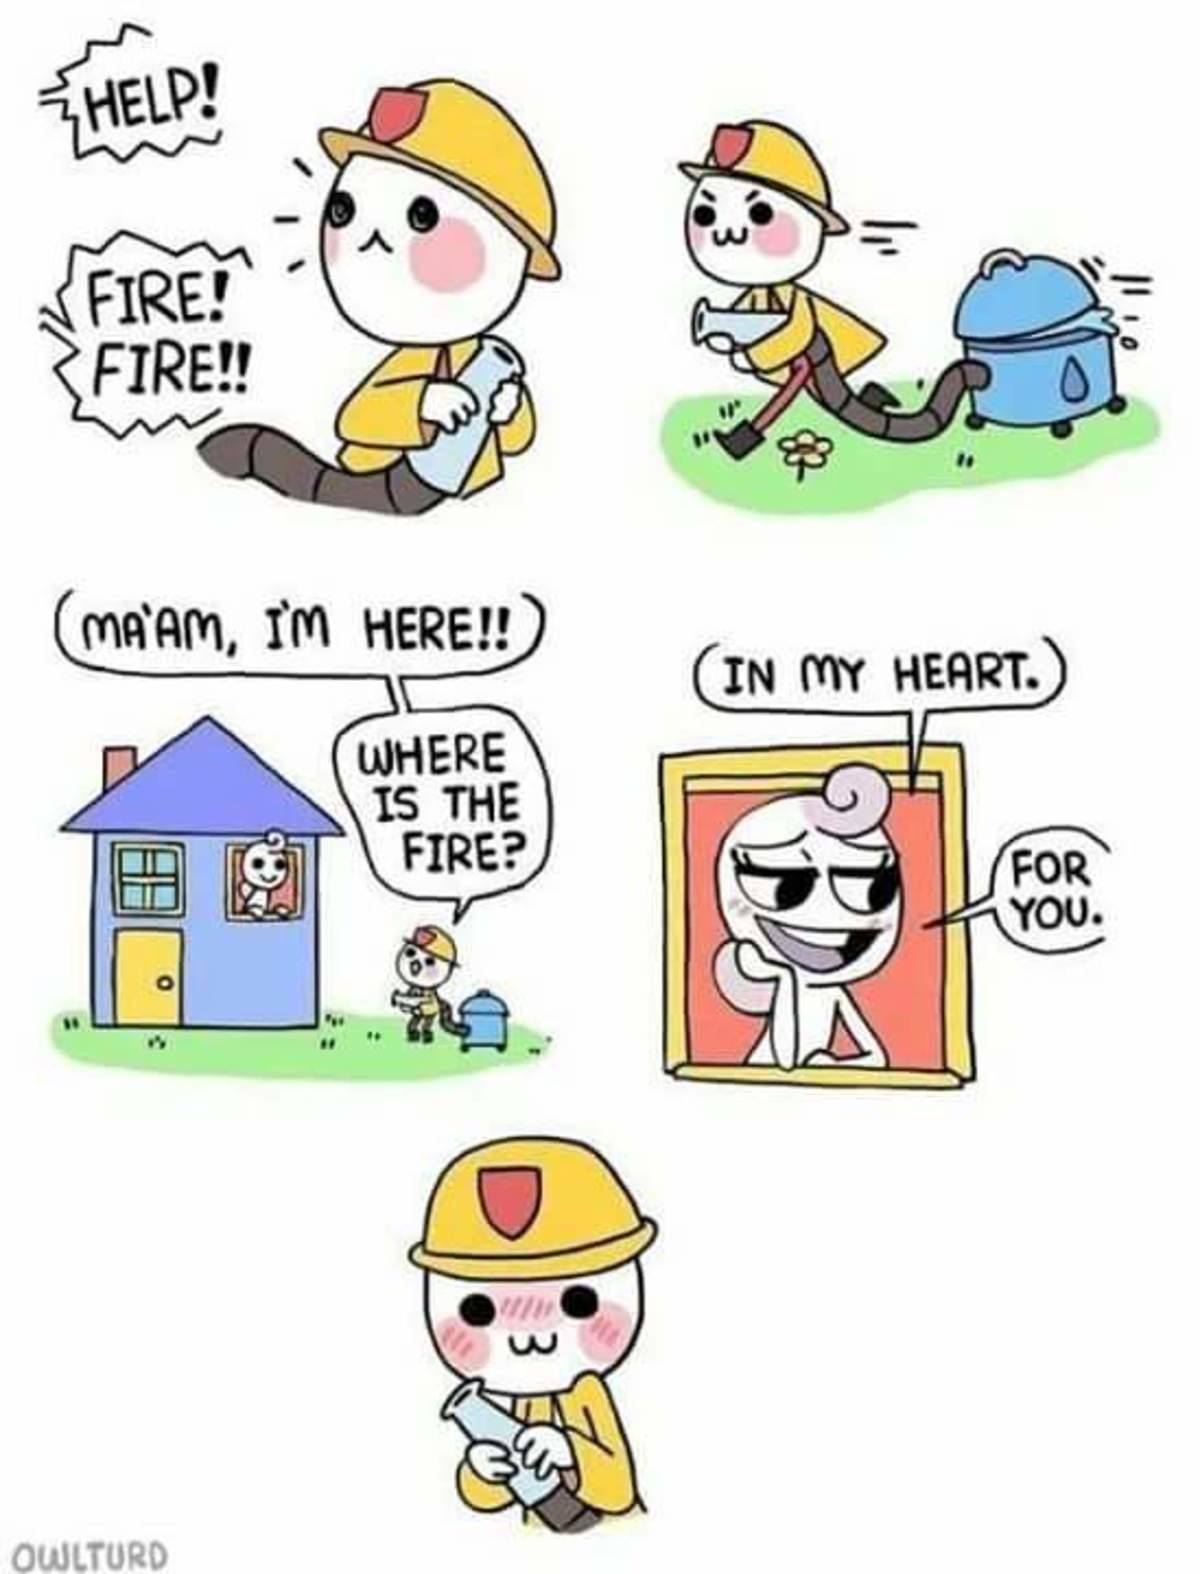 wholesome the meme. join list: LovelyStuff (110 subs)Mention History.. Doesn’t cute fireman dude die in a later comic?